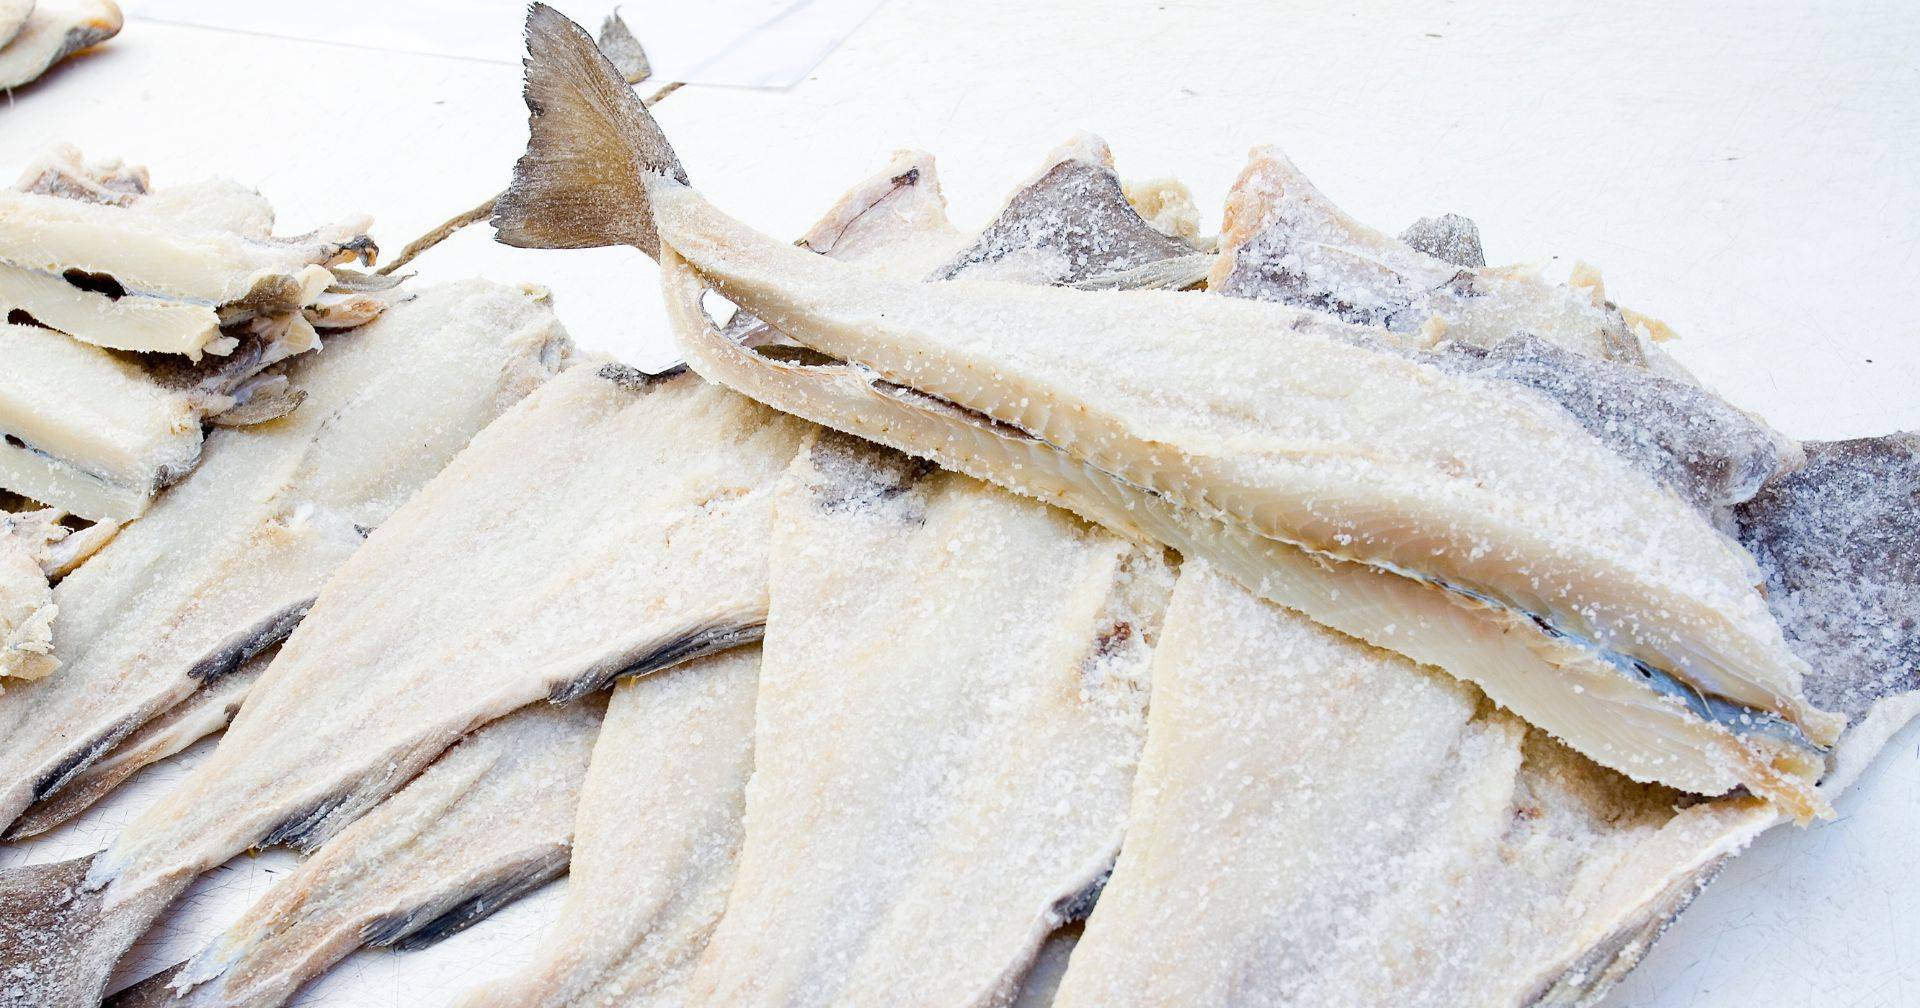 Portugal will be able to fish 2,296 tonnes of cod alongside Canada